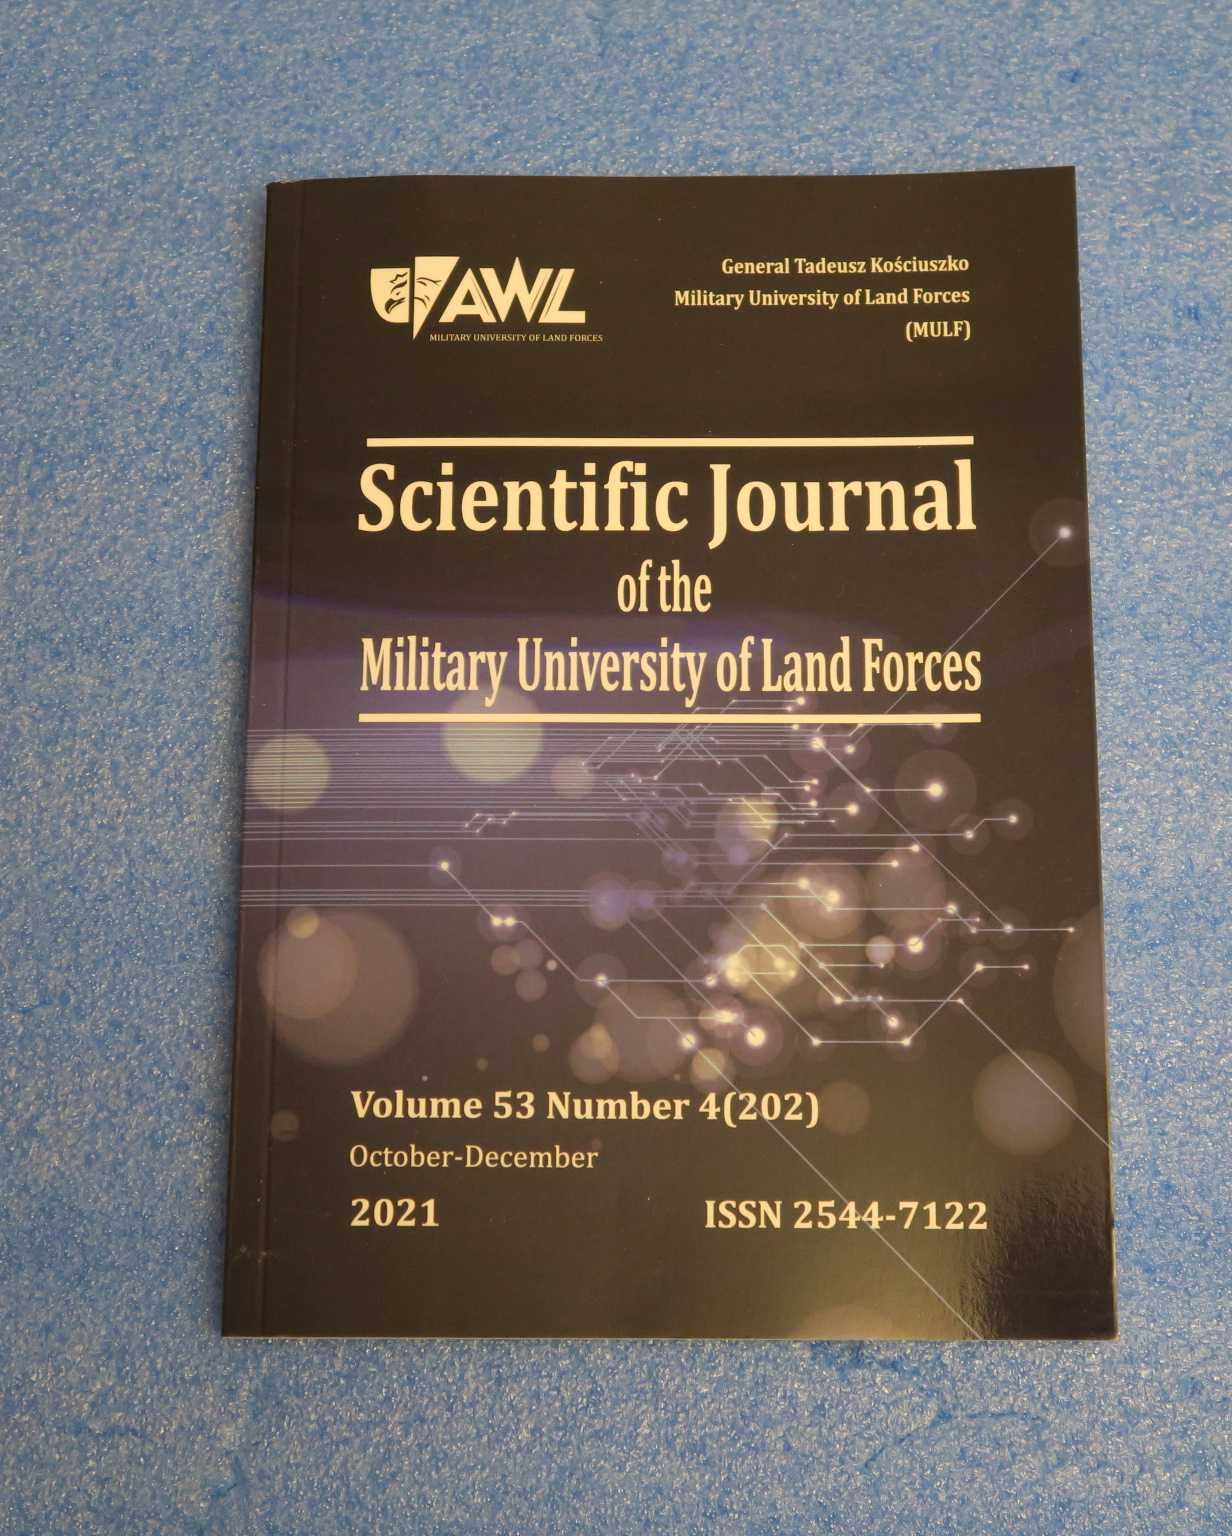 Scientific Journal of the Military University of Land Forces